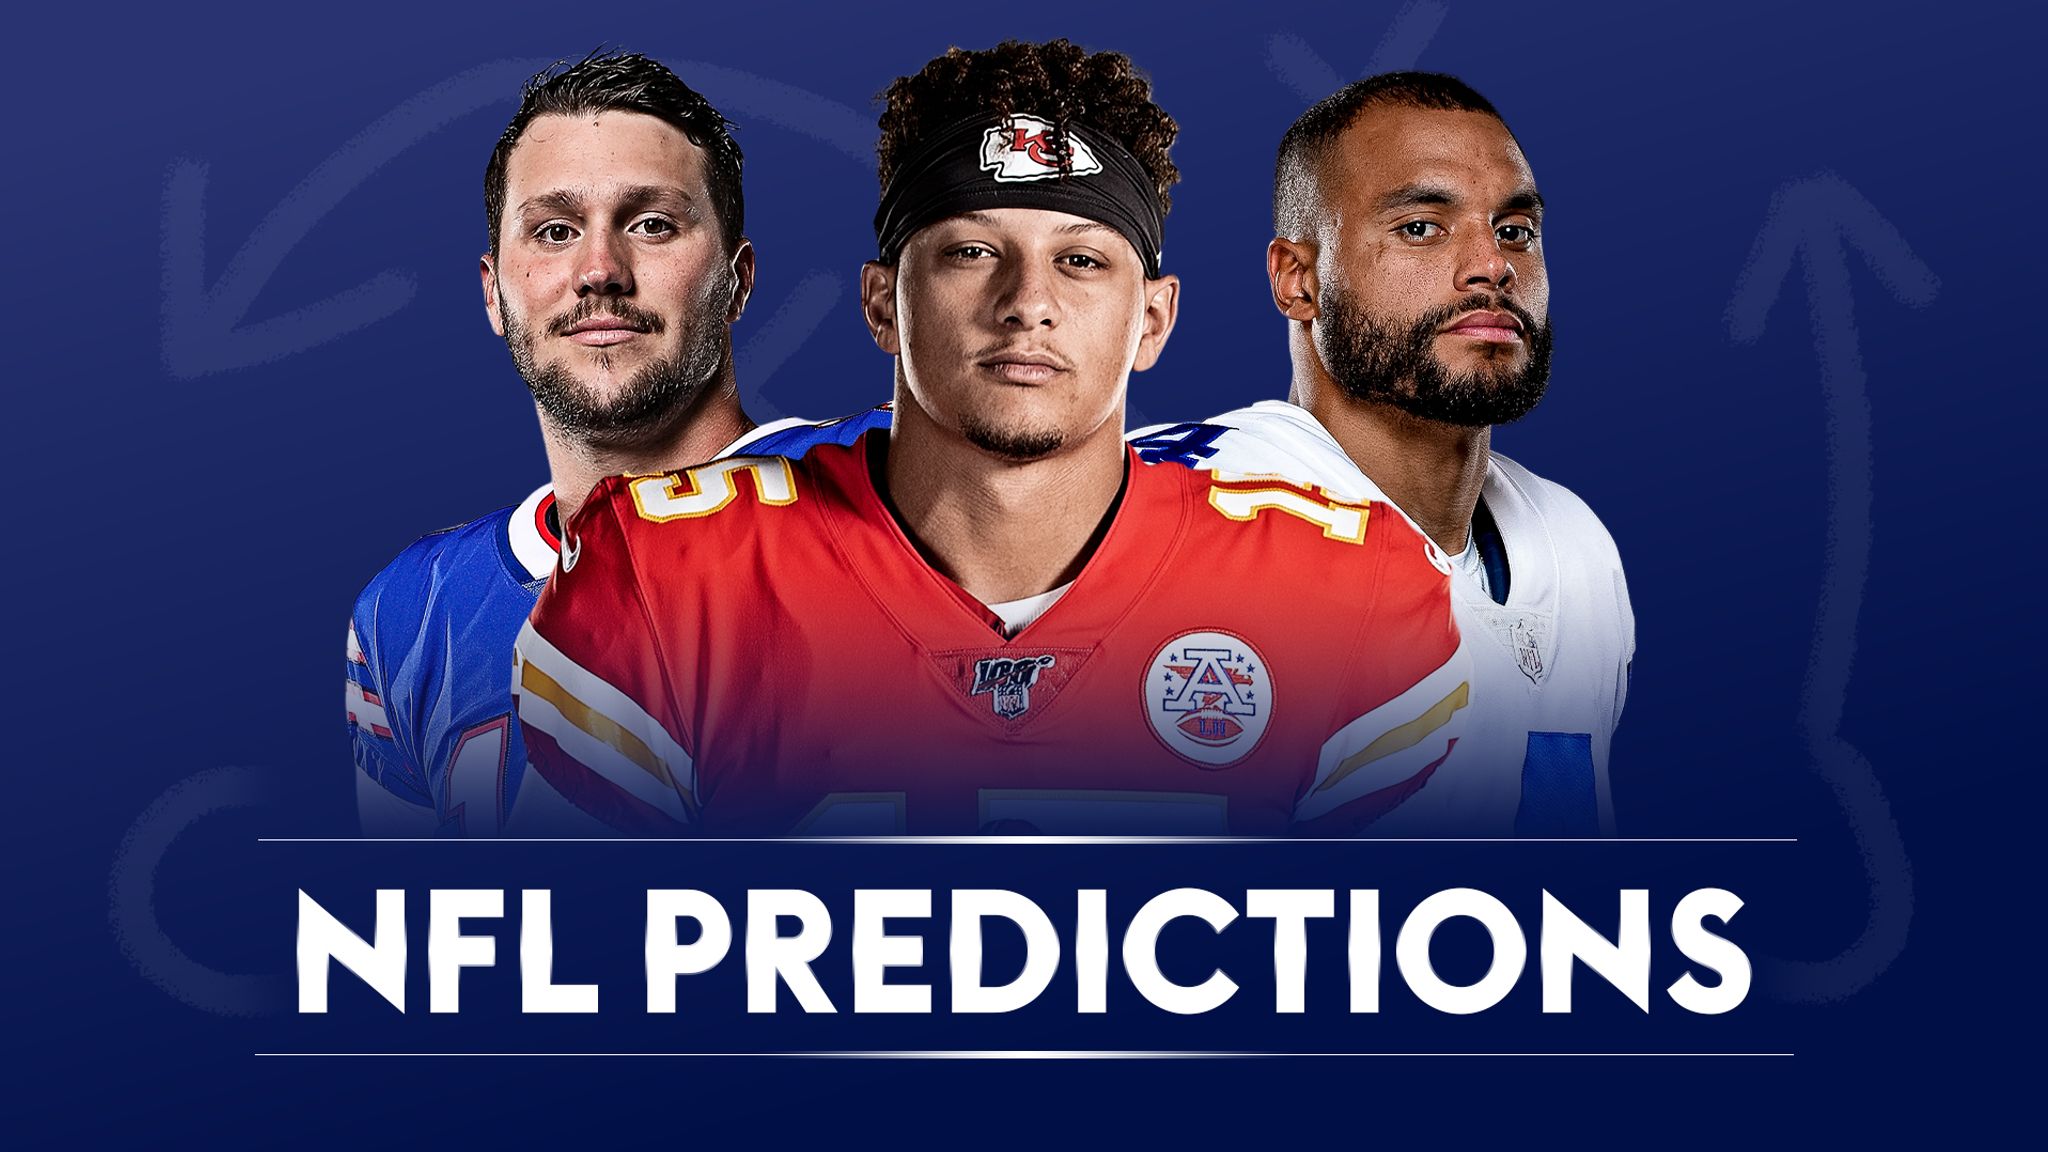 nfl playoff predictions 2021